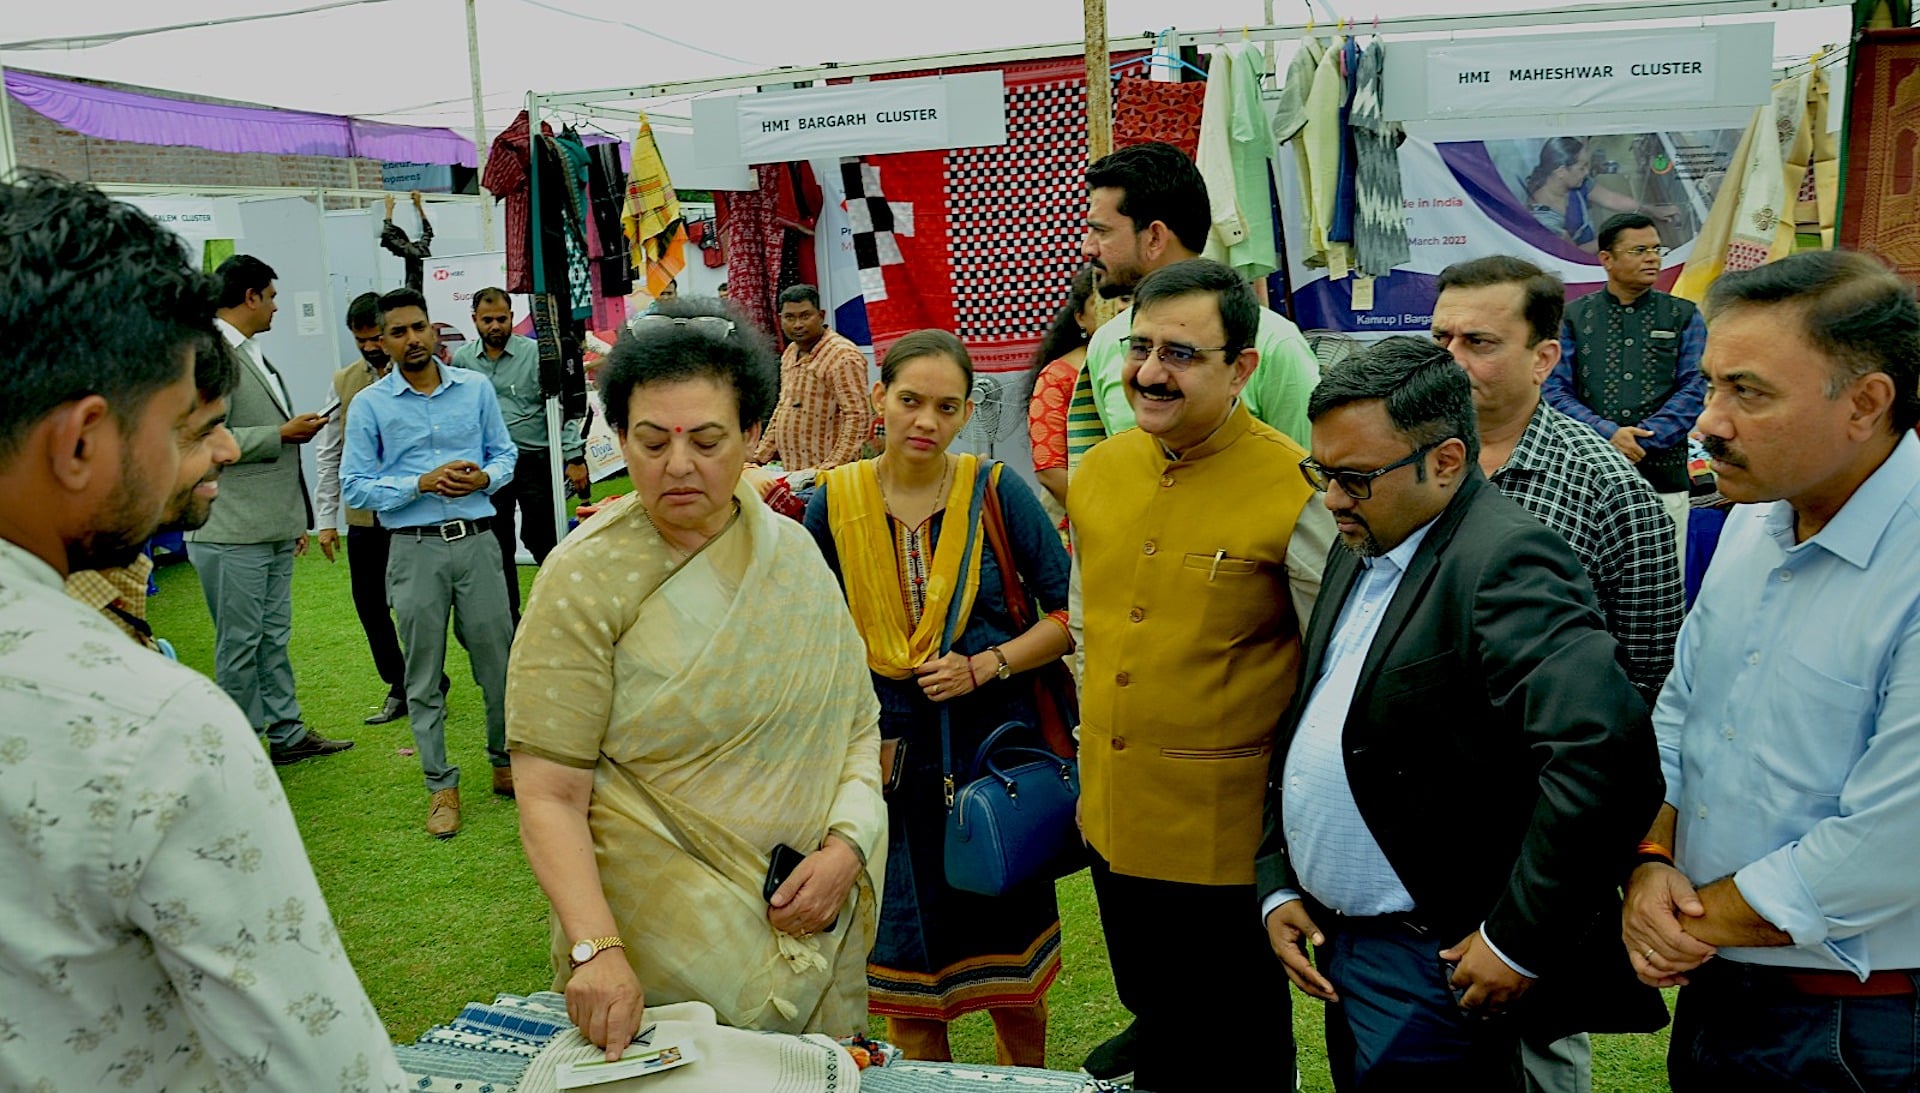 Rekha Sharma, Chairperson, NCW, at the exhibition at Women in Leadership Conclave